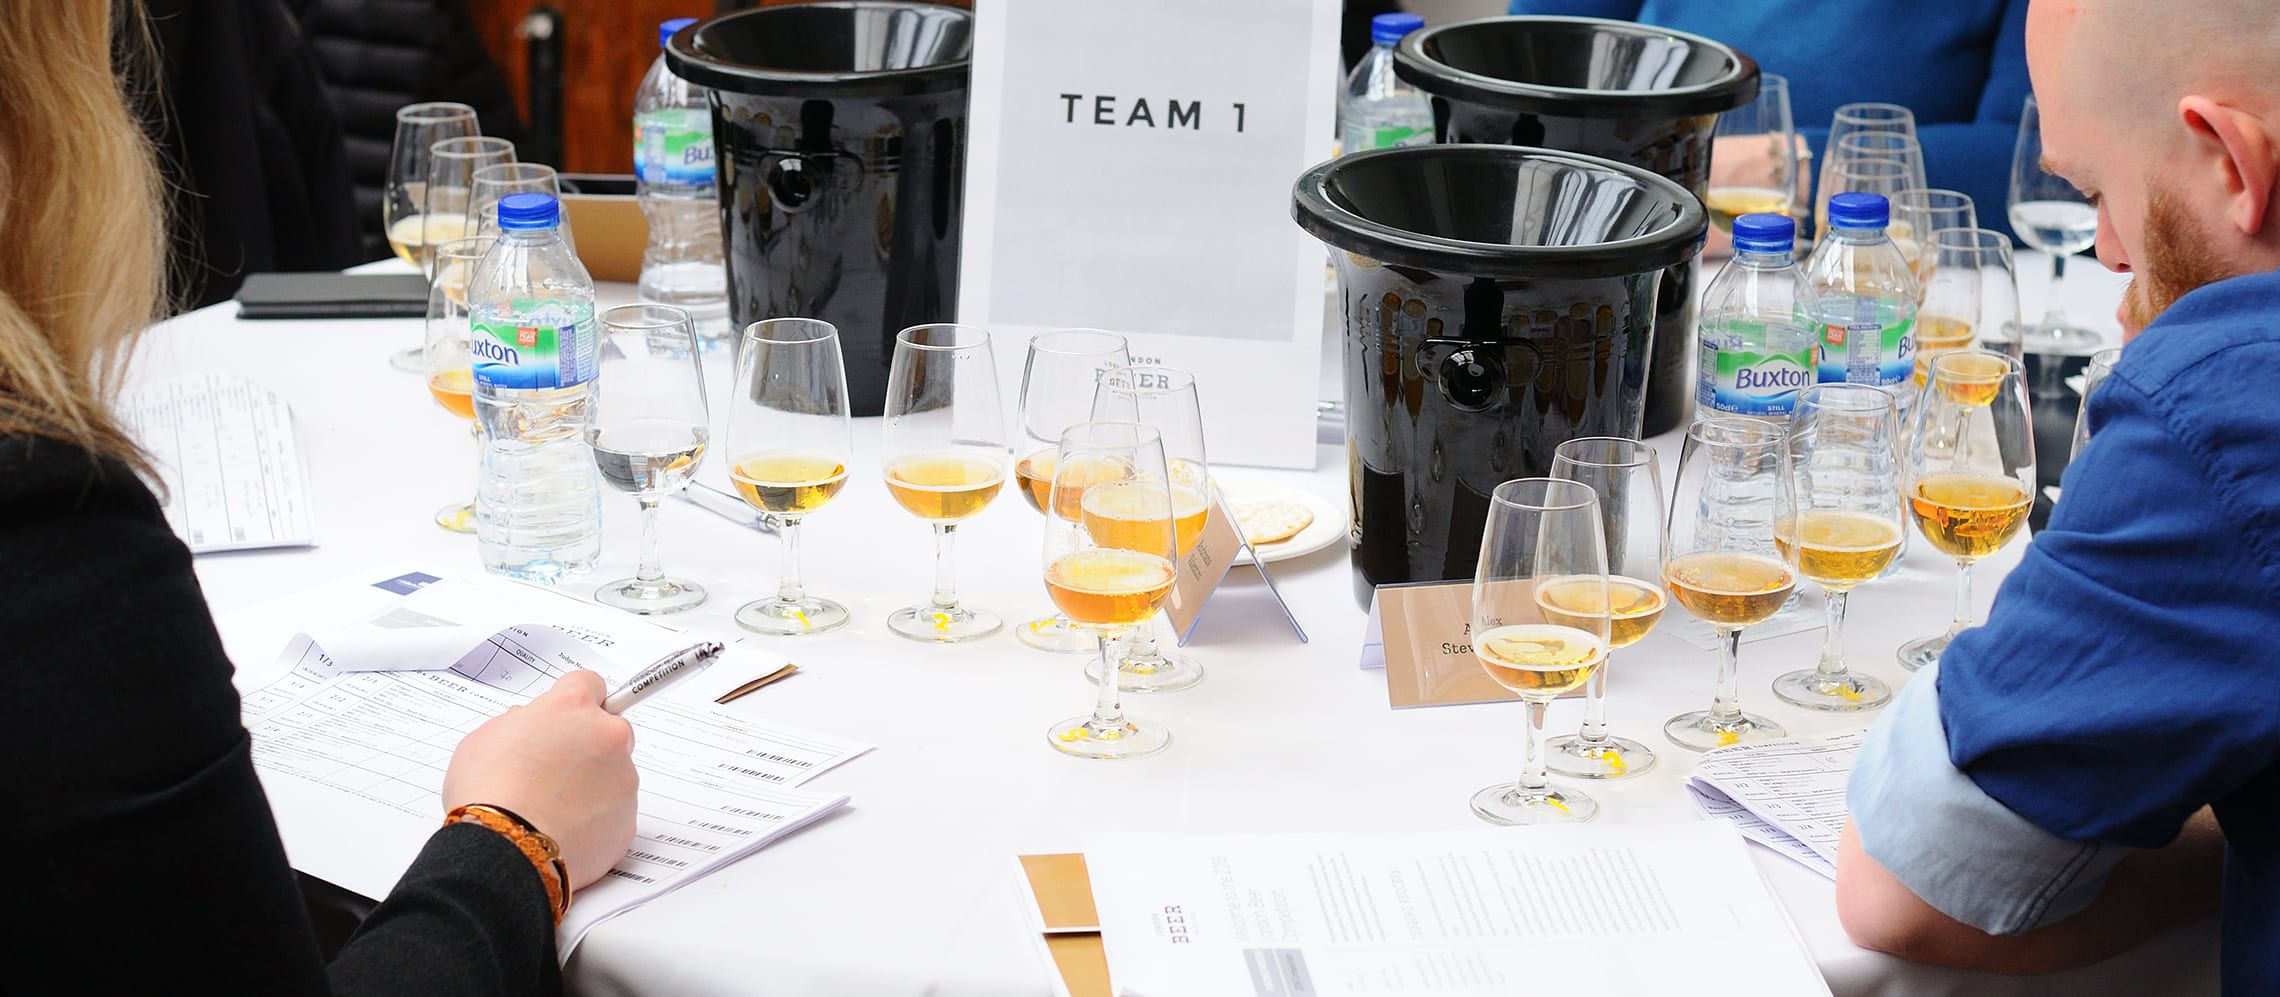 Photo for: London Wine Beer and Spirits Competitions to be Promoted Around the World